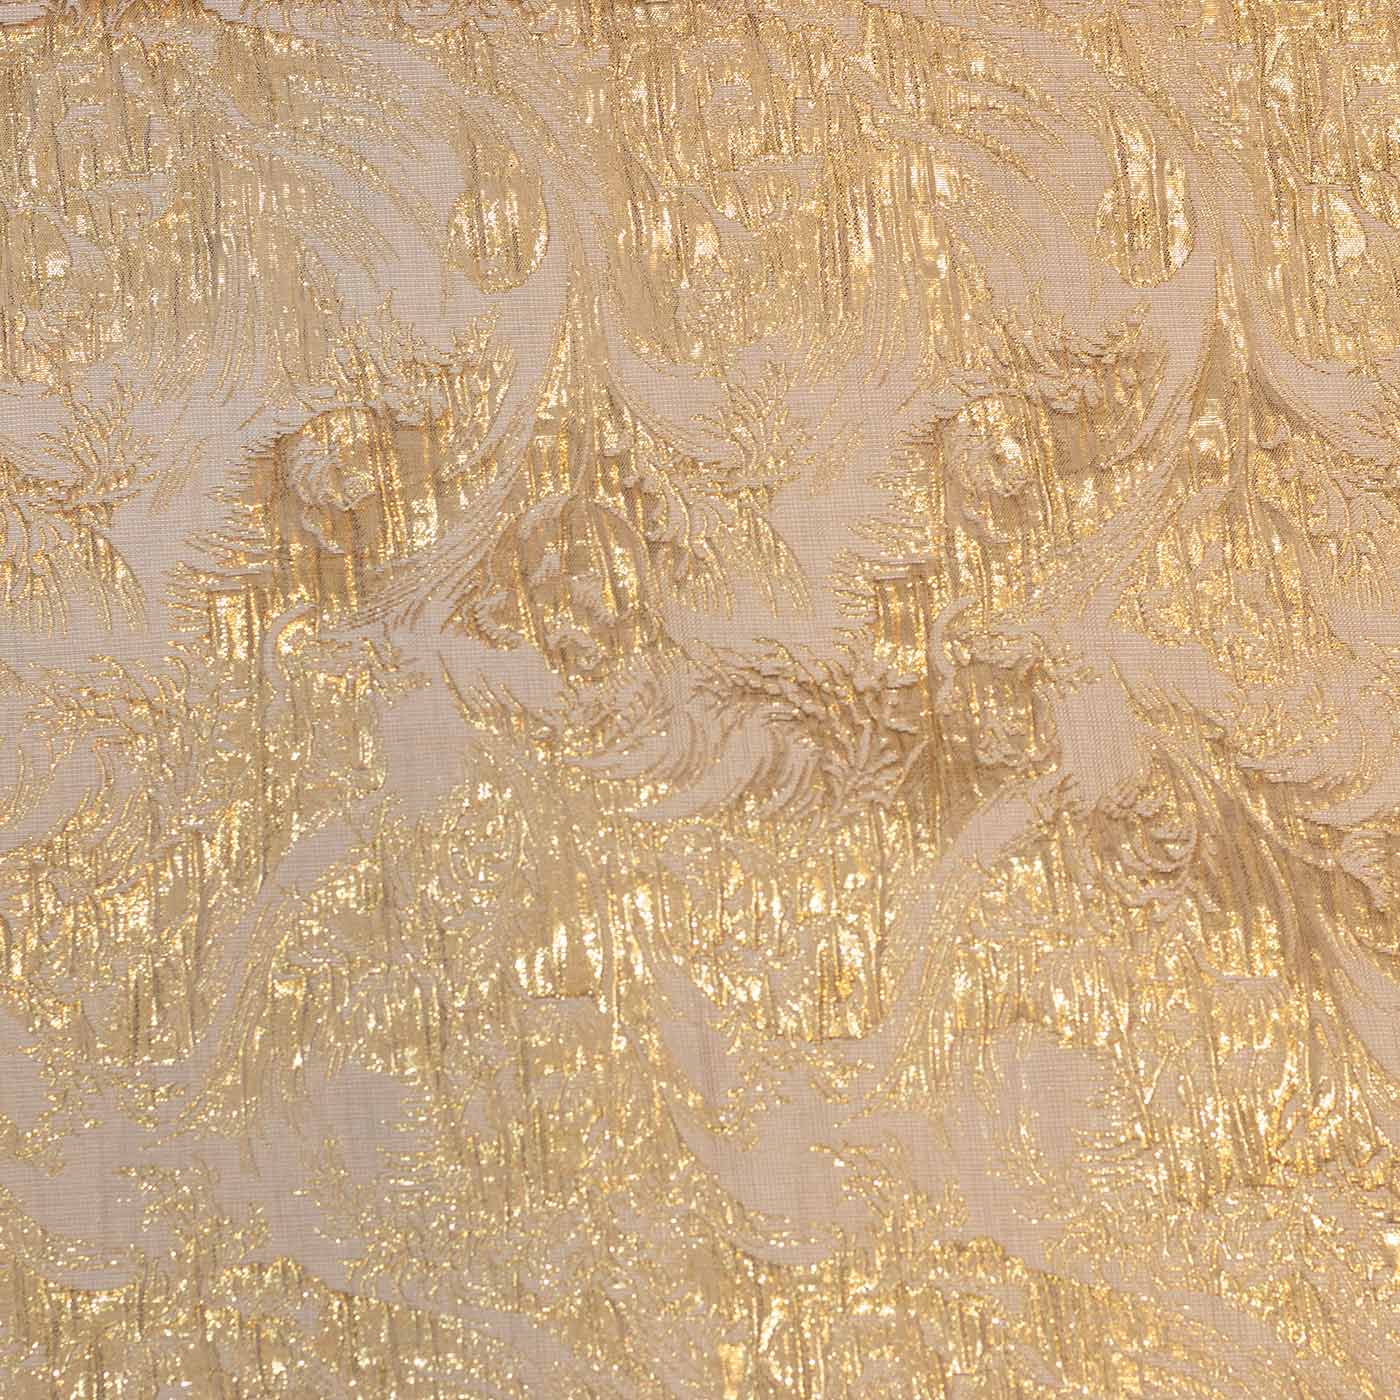 Champaign Gold Abstract Floral Brocade Fabric